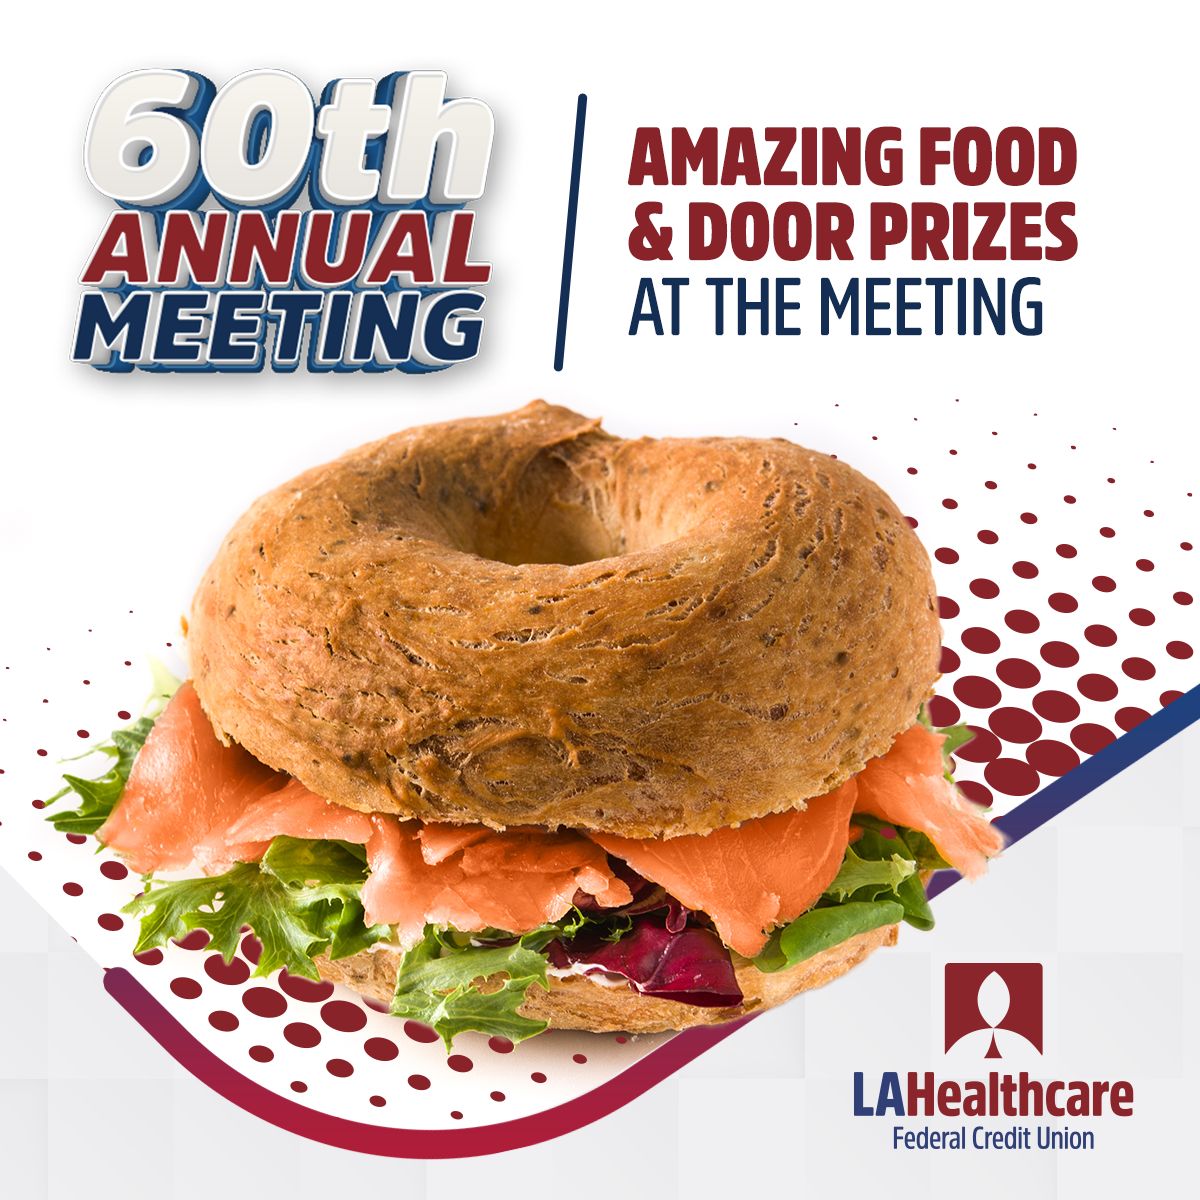 Registration is still open! You have until April 24th to join us for an event filled with exciting recaps, delicious food, and fantastic prizes at our annual meeting. We invite you to the 60th AnnualMeeting of the @LAHFCU on Thursday, April 25th! 
👉  buff.ly/49xE4D7